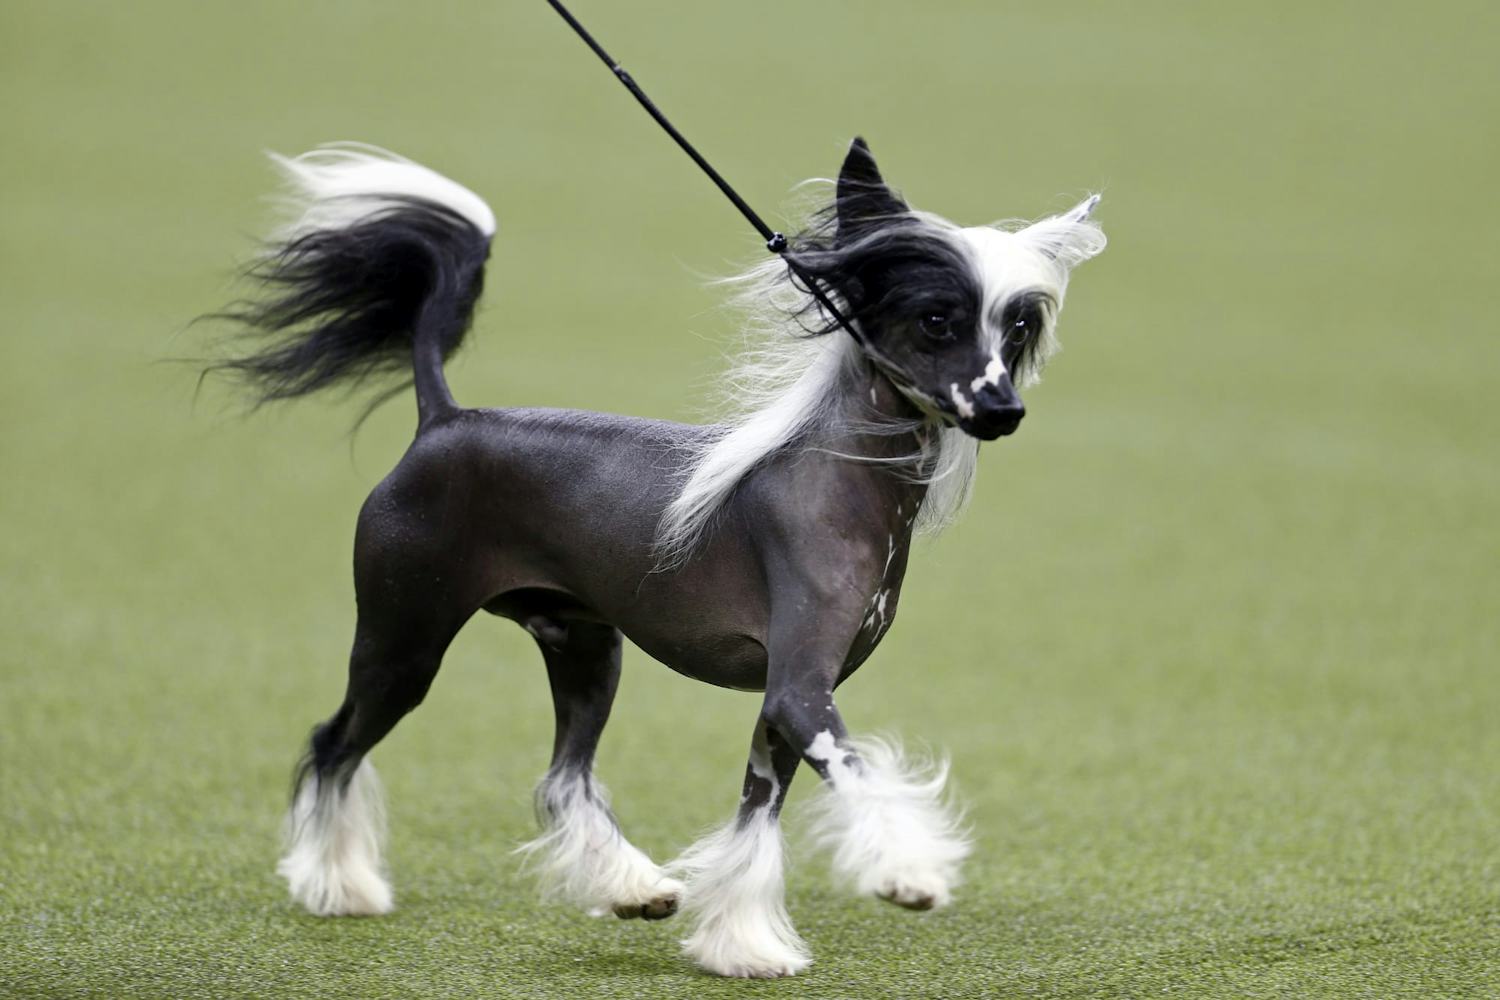 Secondary image of Chinese Crested dog breed